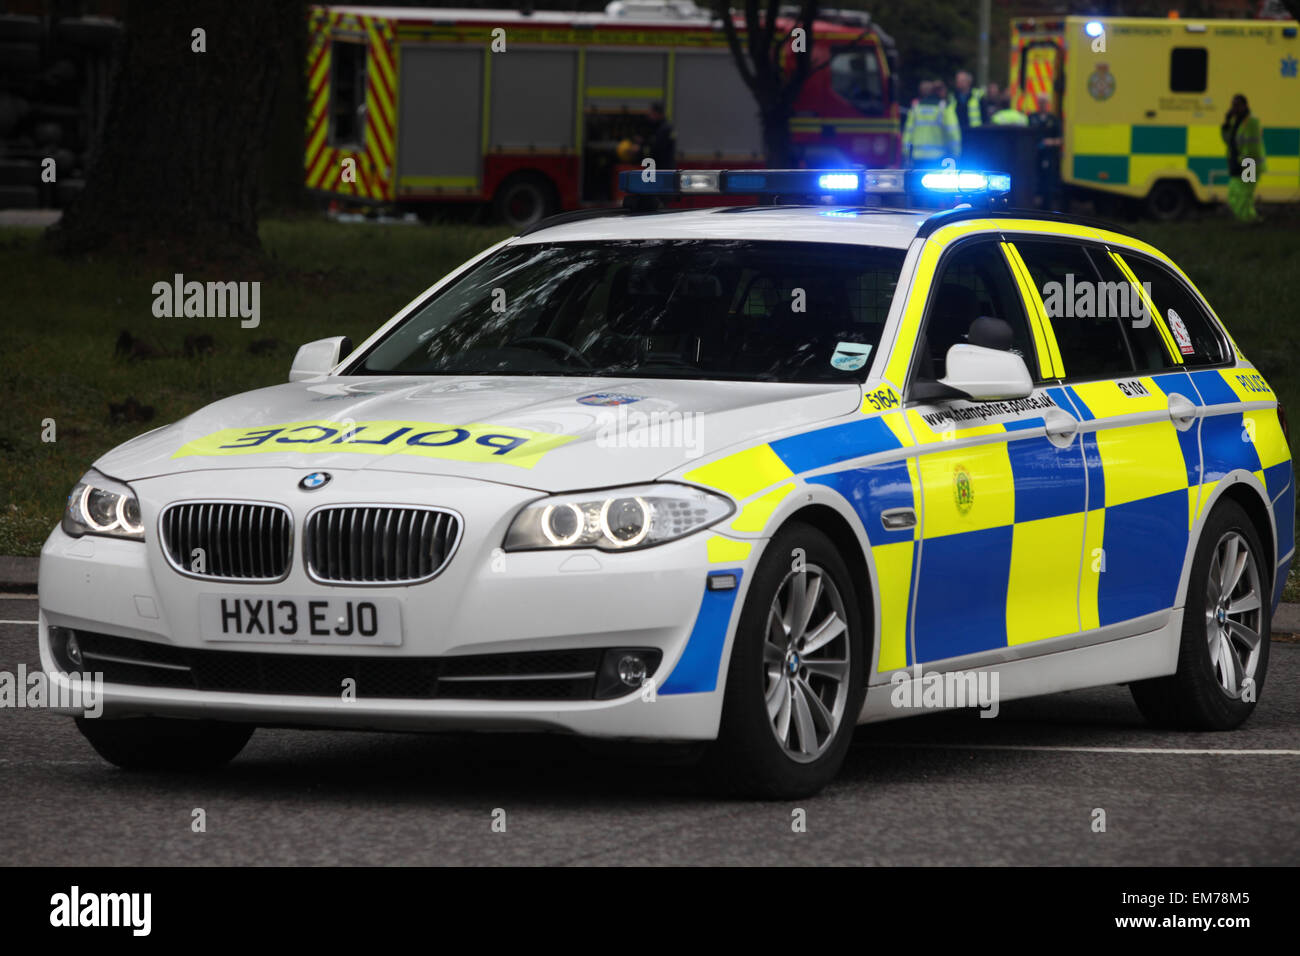 Police car in front of ambulance and fire engine emergency services Stock Photo